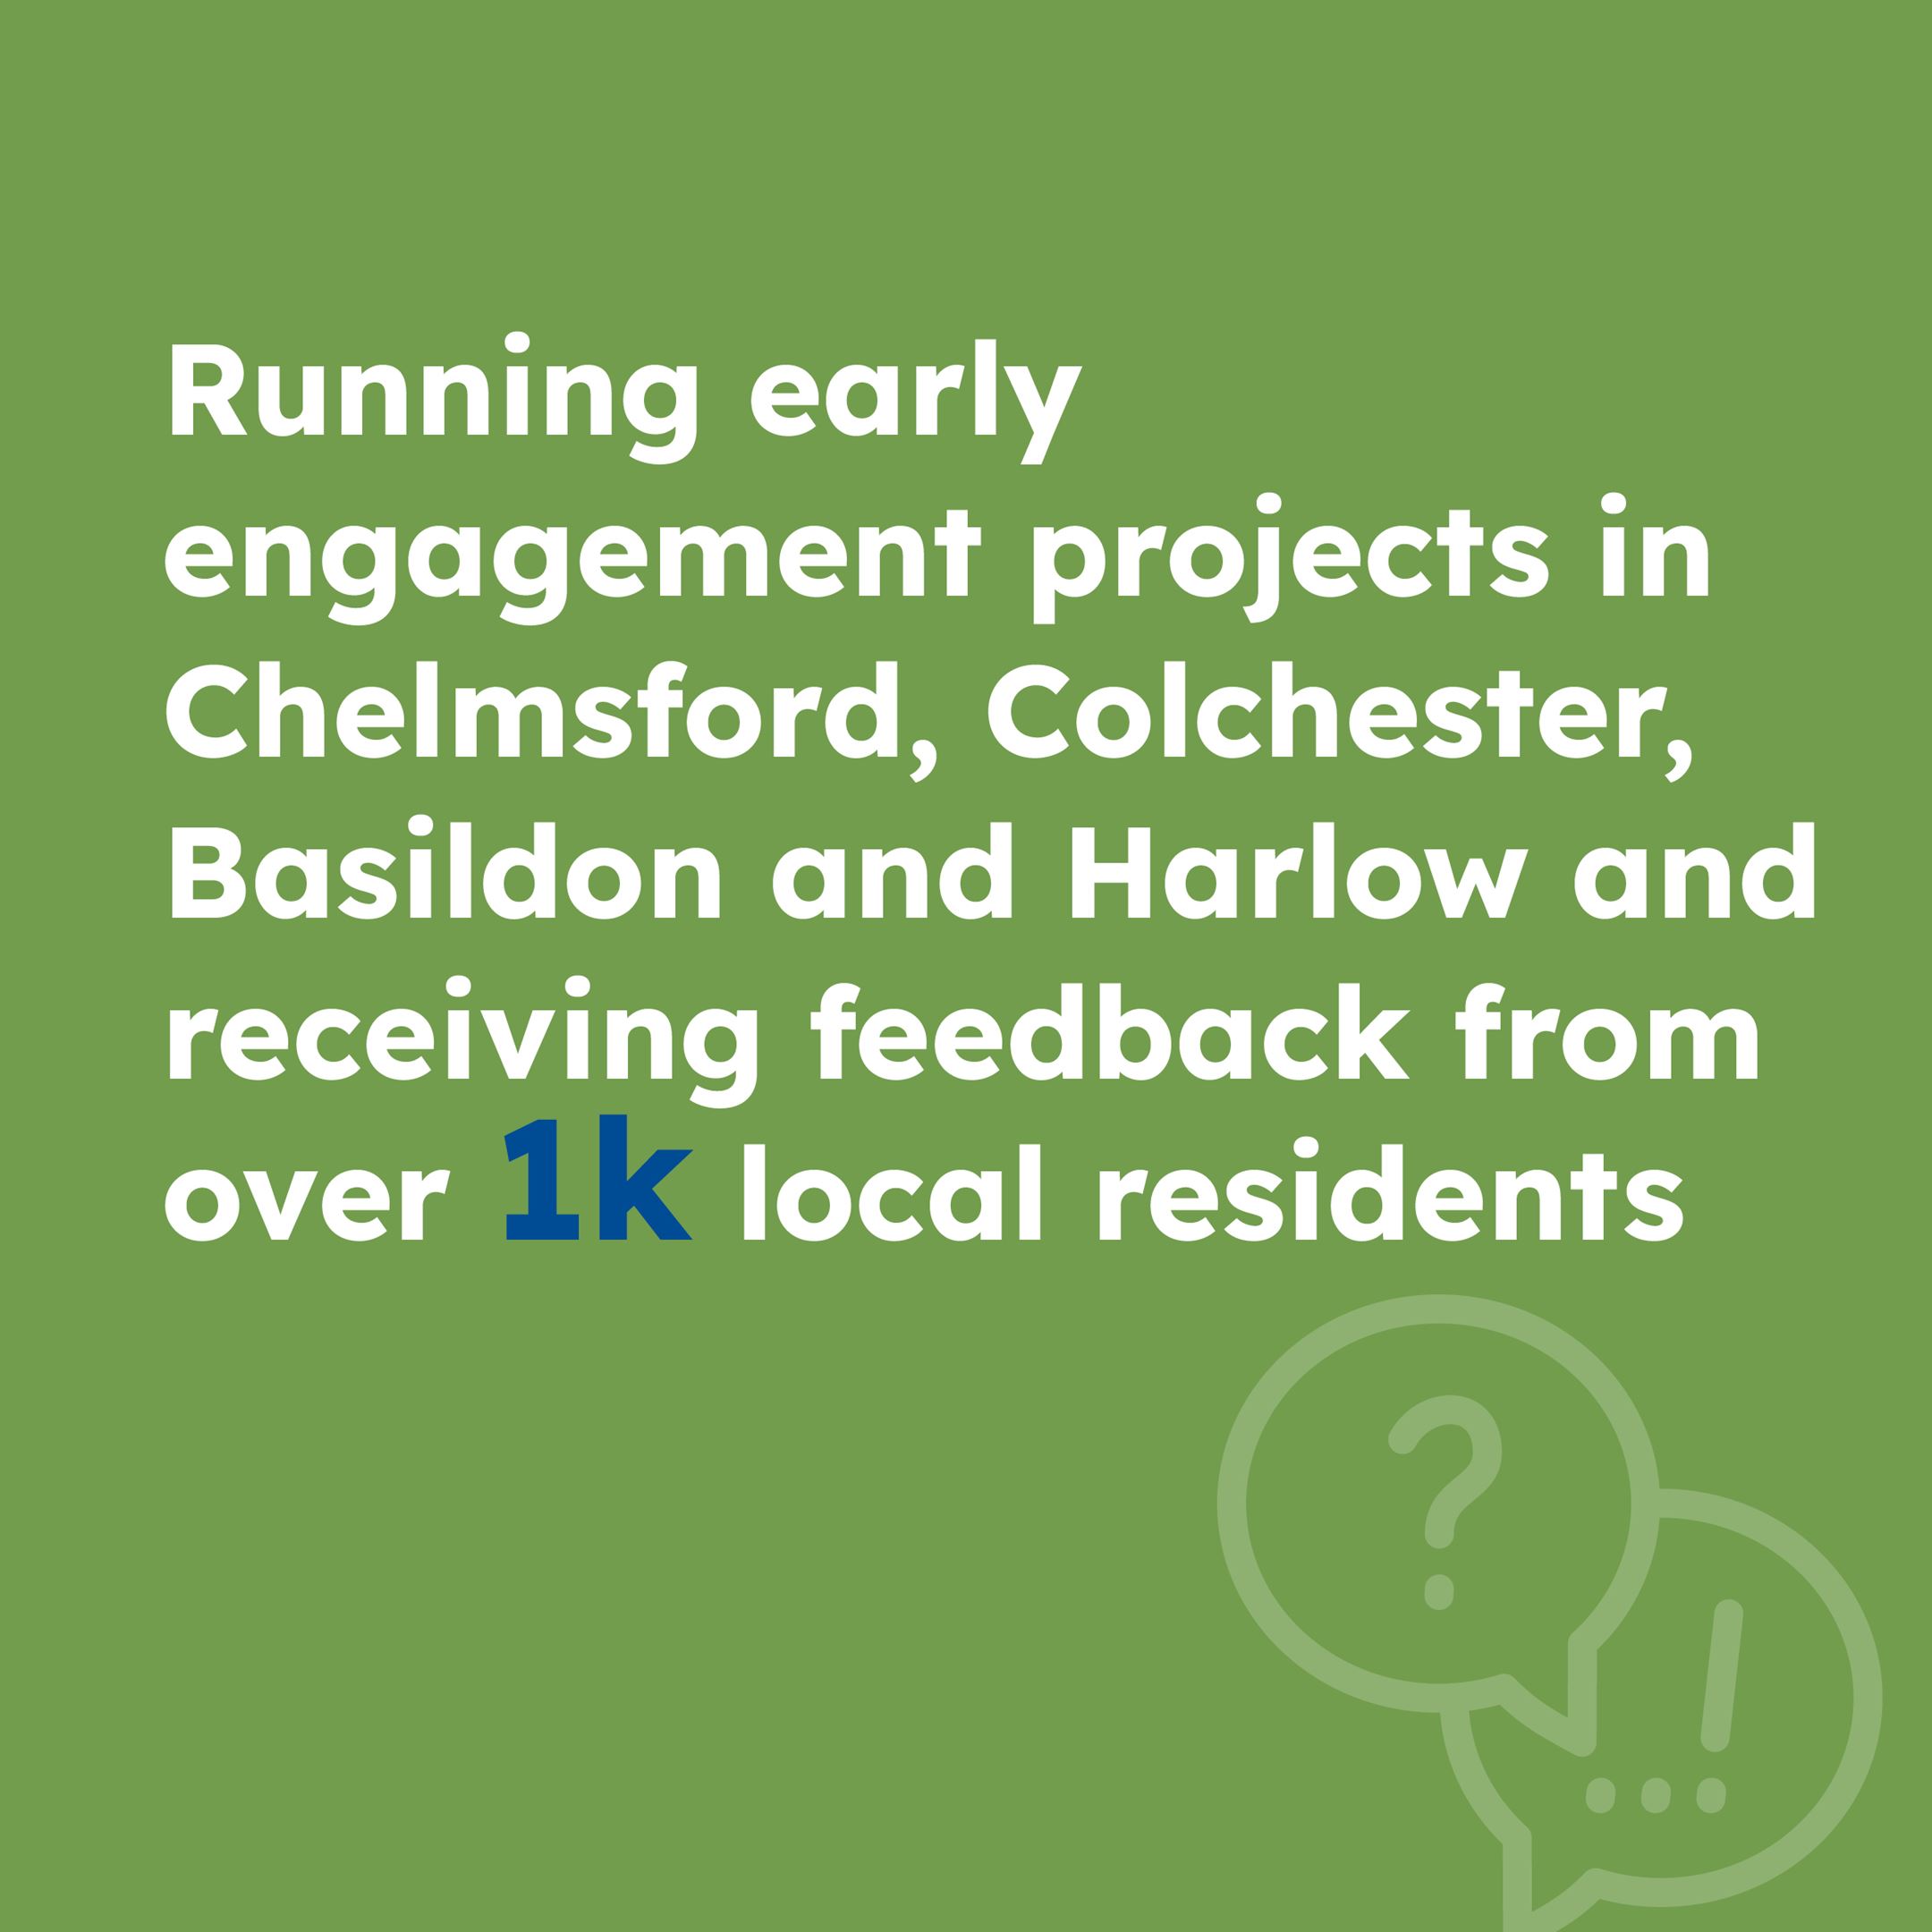 Running early engagement projects in Chelmsford, Colchester, Basildon and Harlow and receiving feedback from over 1k local residents